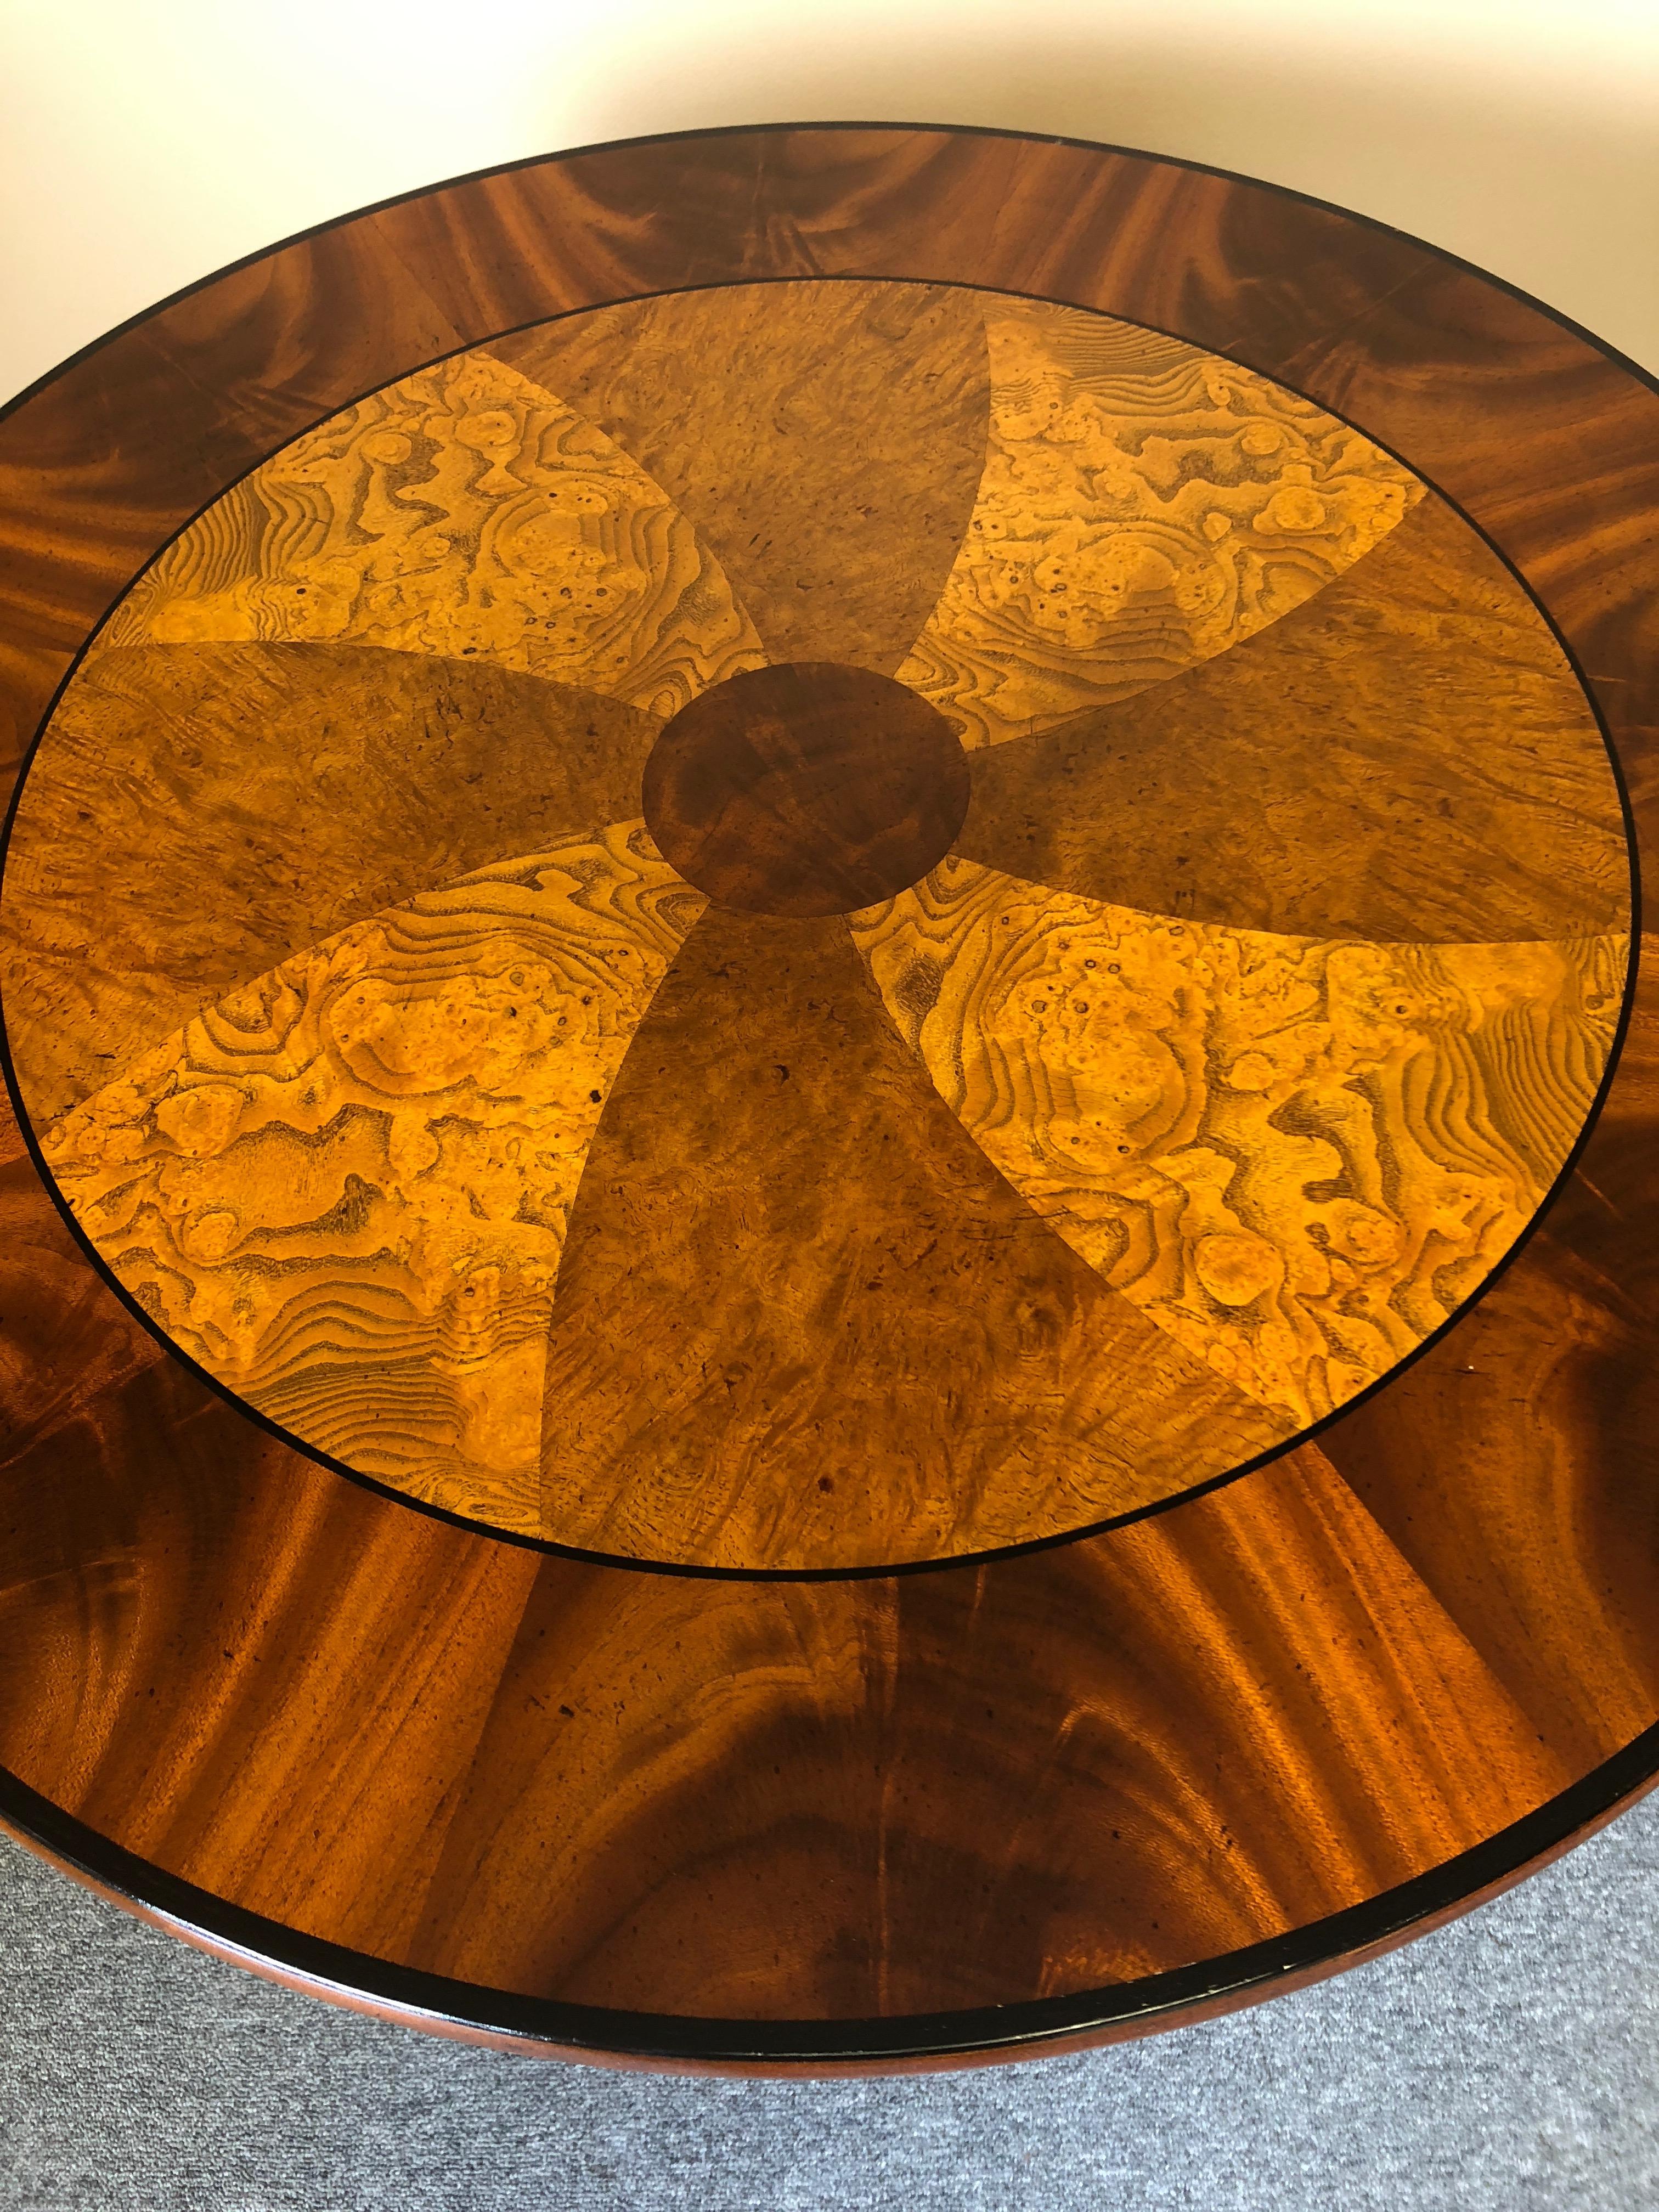 An eye-catching elegant round flame mahogany and burl side table
Having wonderful decorative pinwheel pattern on top with ebony border and decorative brass adornments including brass paw feet.